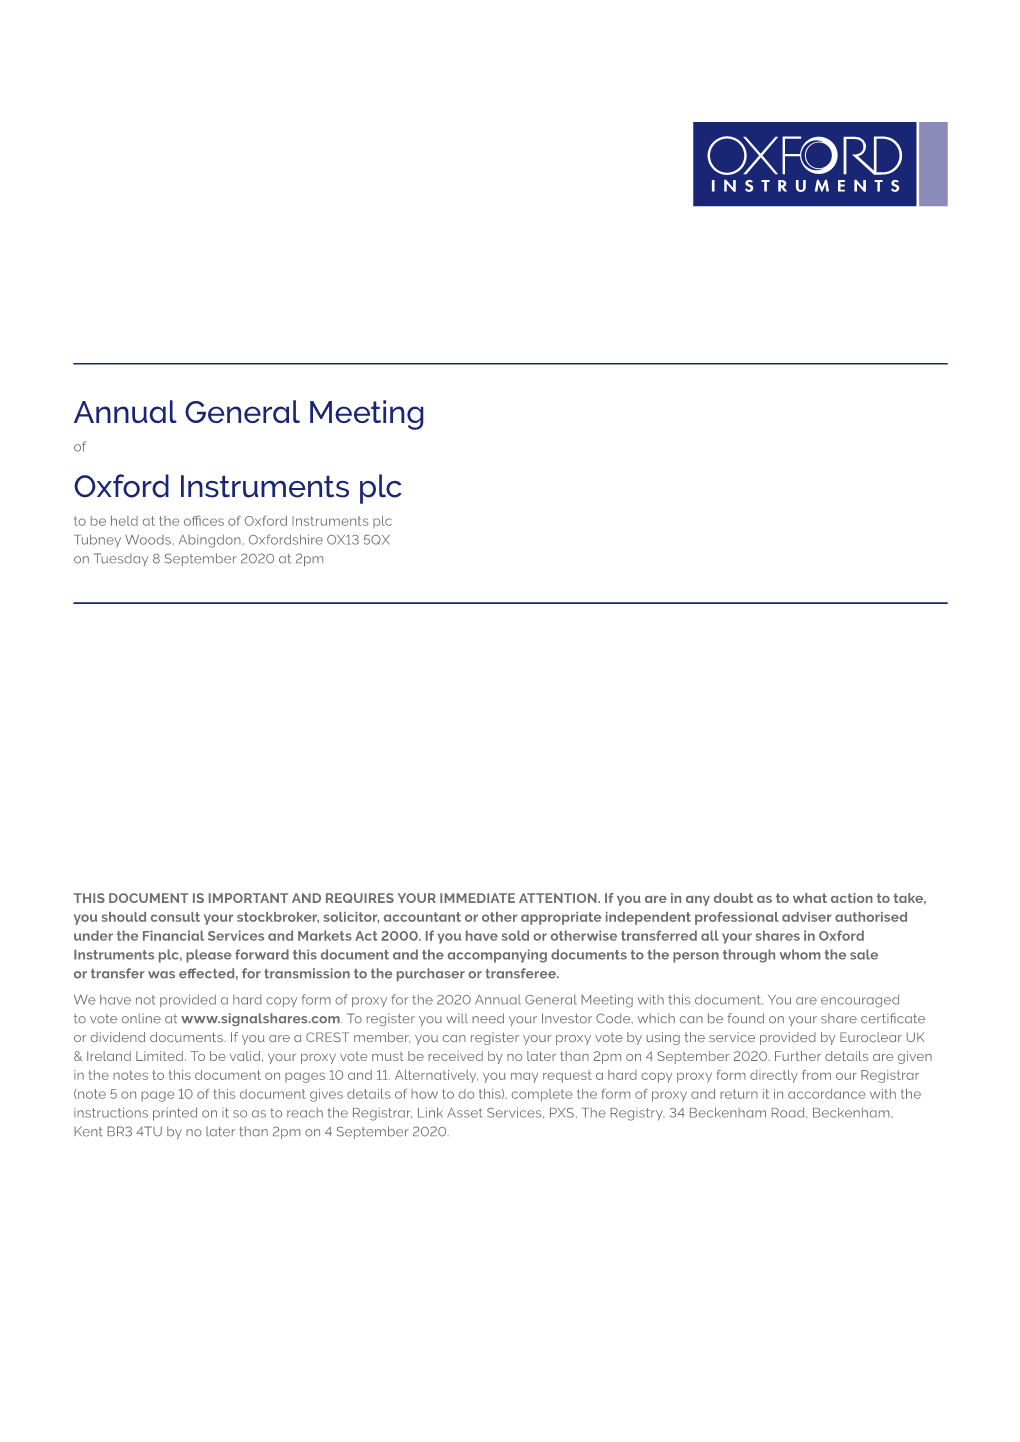 Annual General Meeting 2020 Oxford